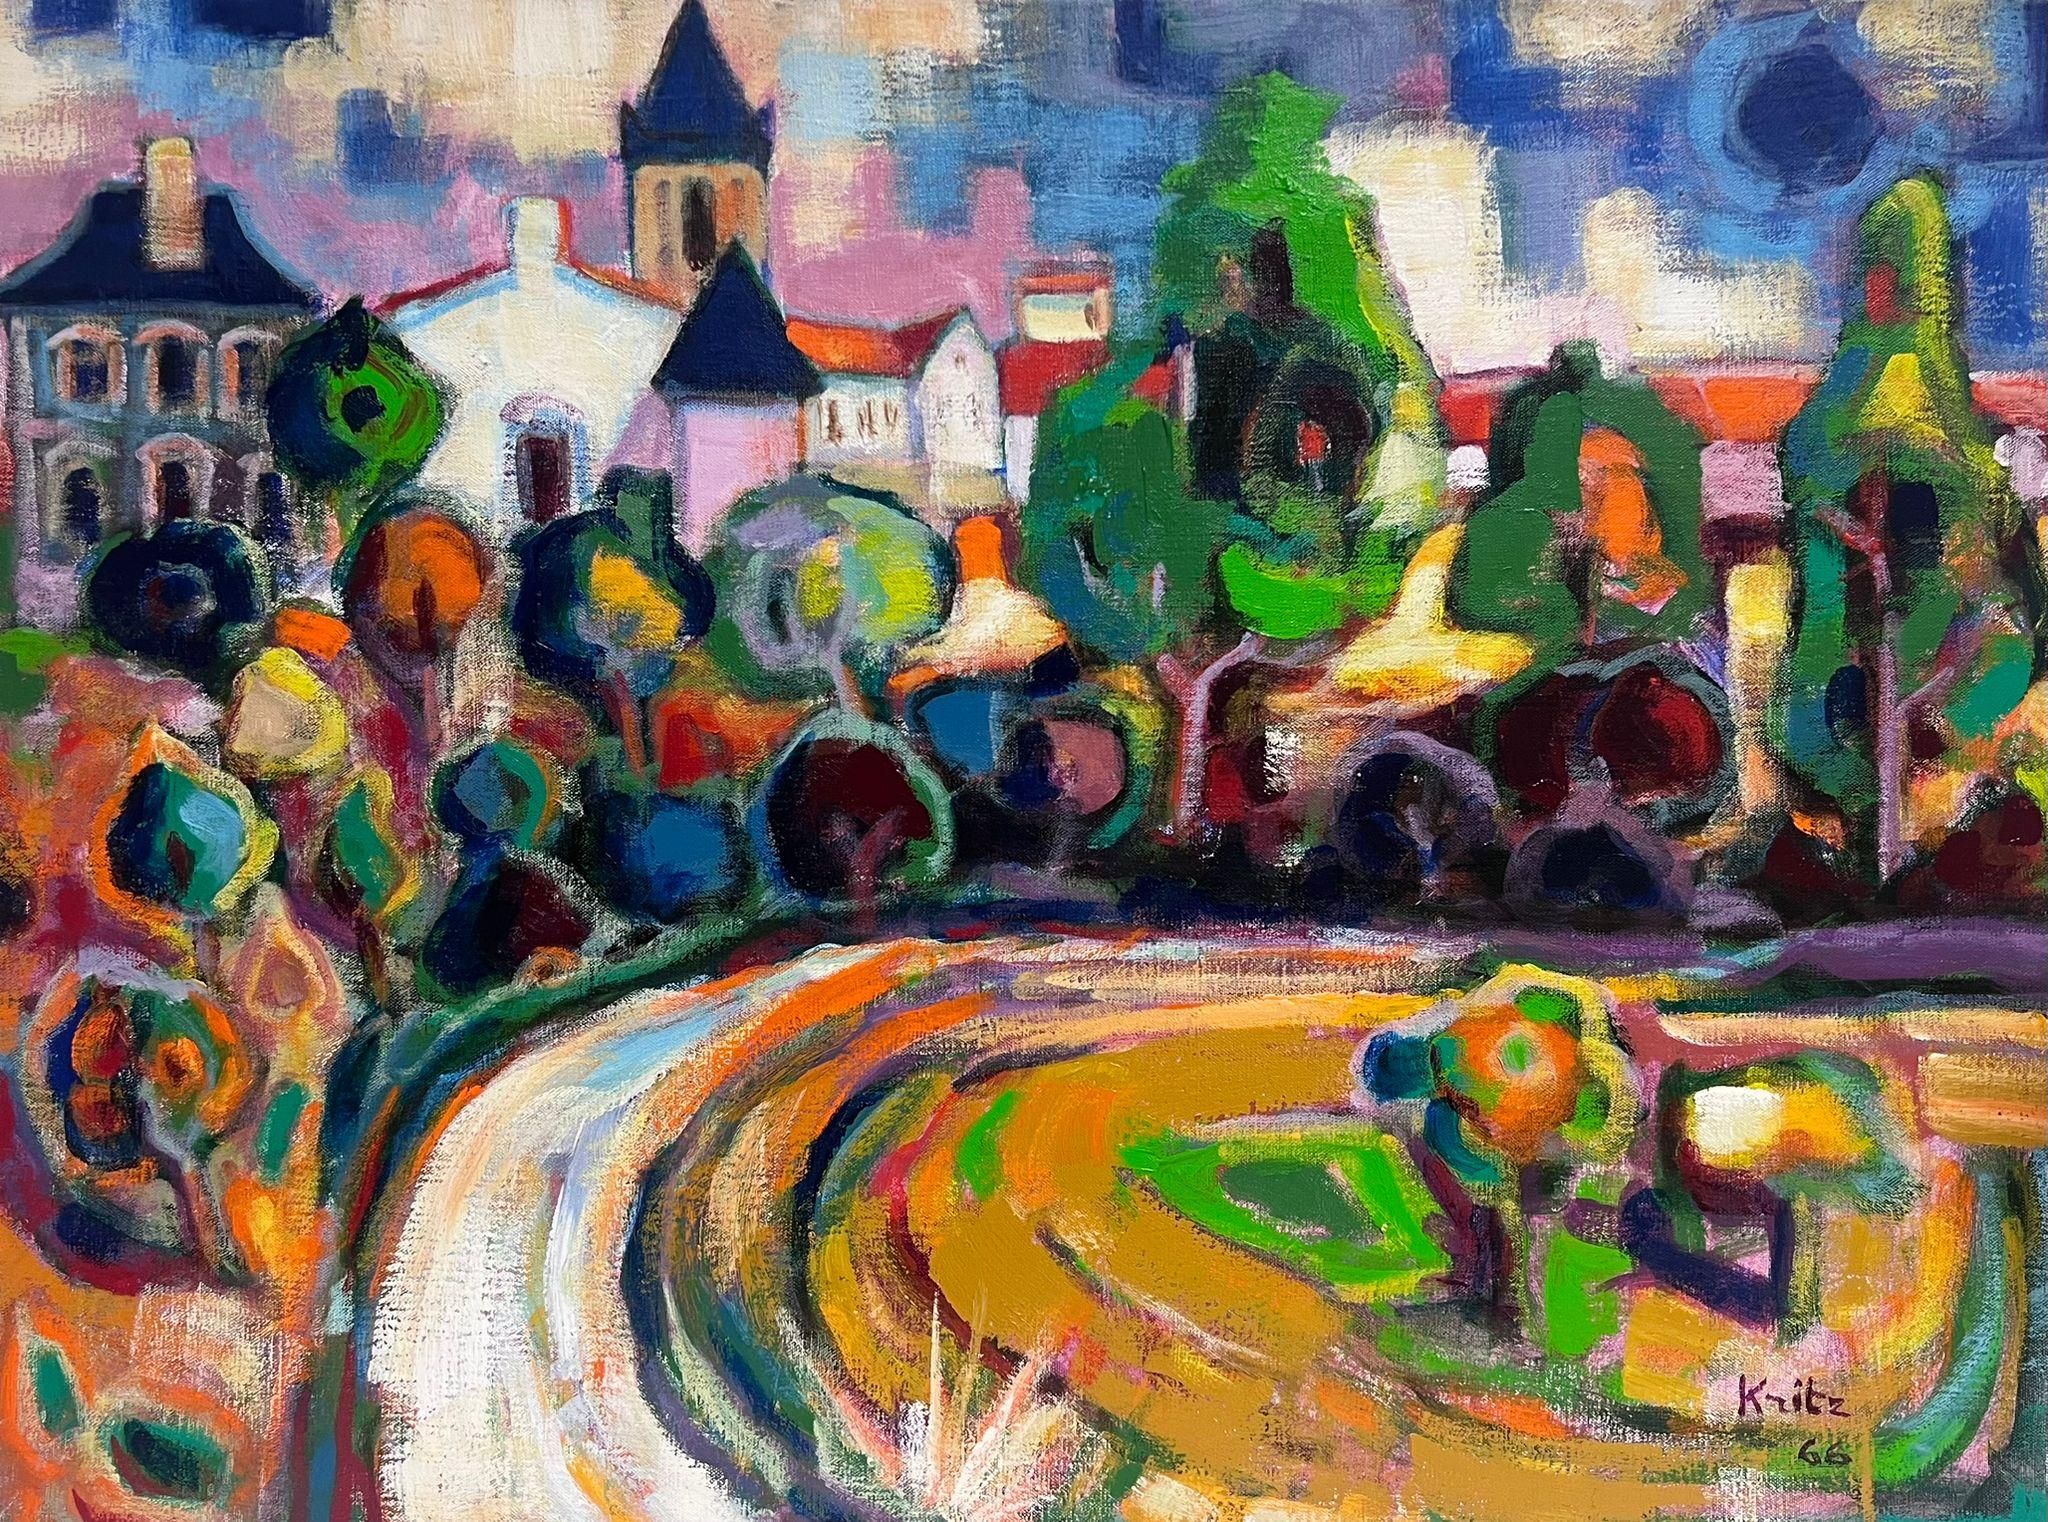 The French Town
by Michel Kritz (French 1925-1994)
signed & dated 66'
signed oil on canvas, unframed
canvas: 24 x 32 inches
provenance: private collection, France
condition: very good and sound condition  